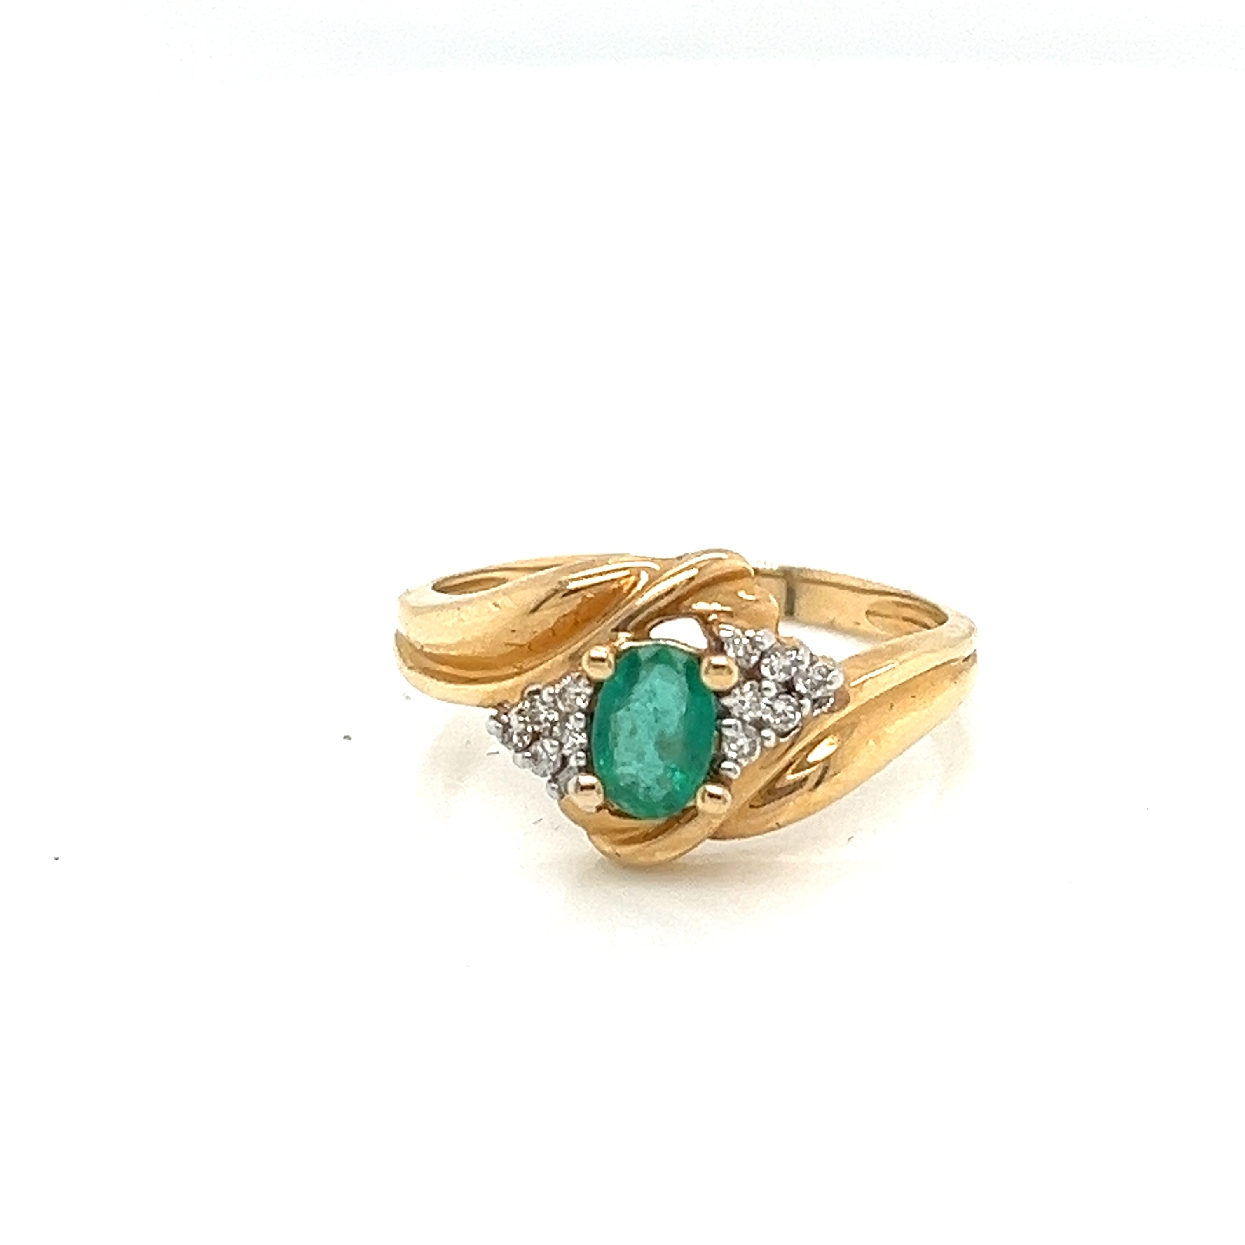 14K Yellow Gold Emerald Ring with Diamond Accents Size 8